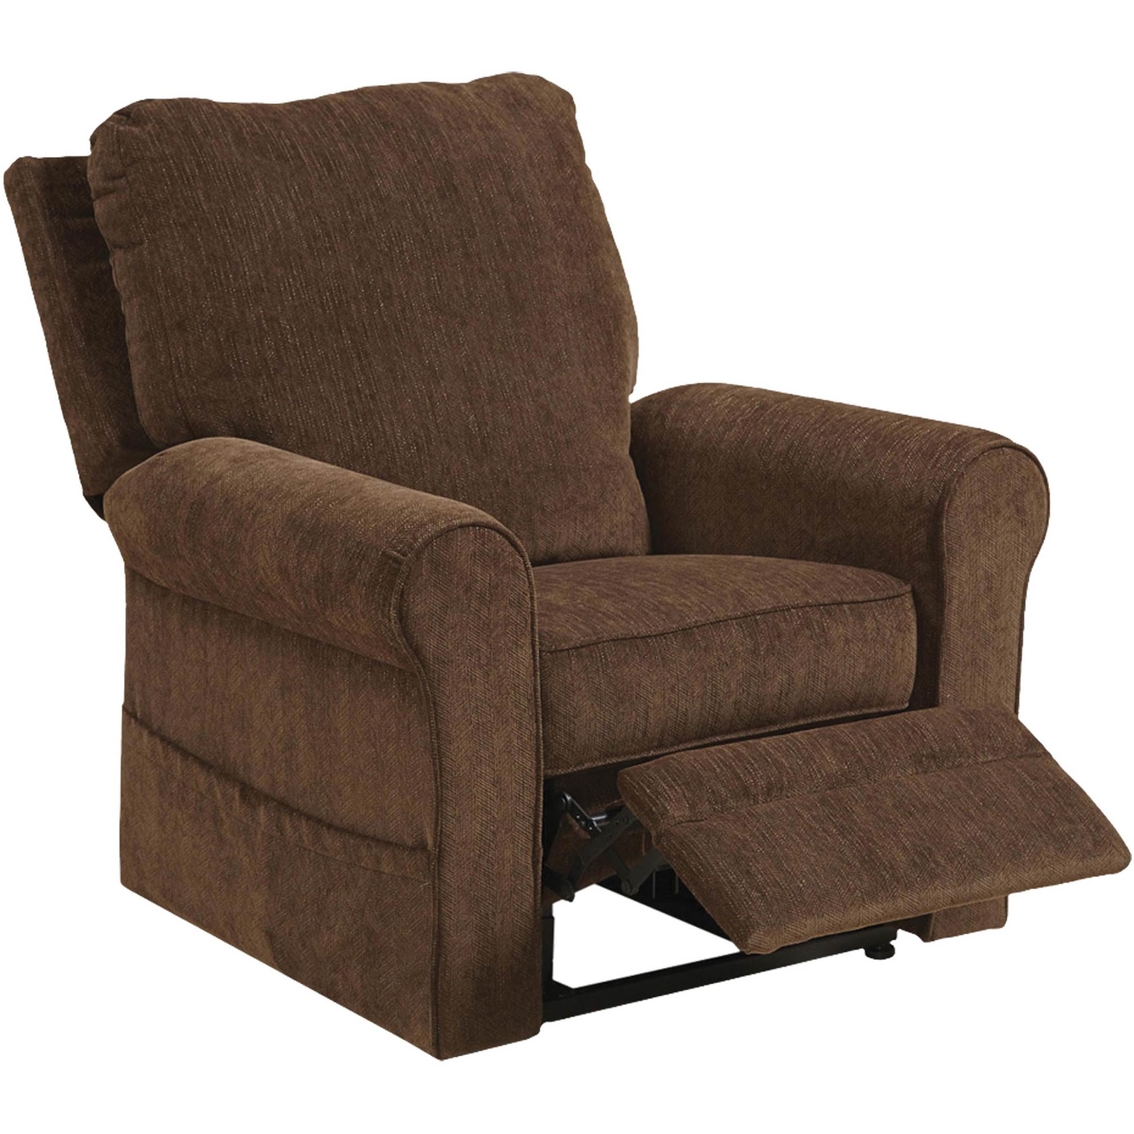 Catnapper Edwards Power Lift Recliner Chairs Recliners Home